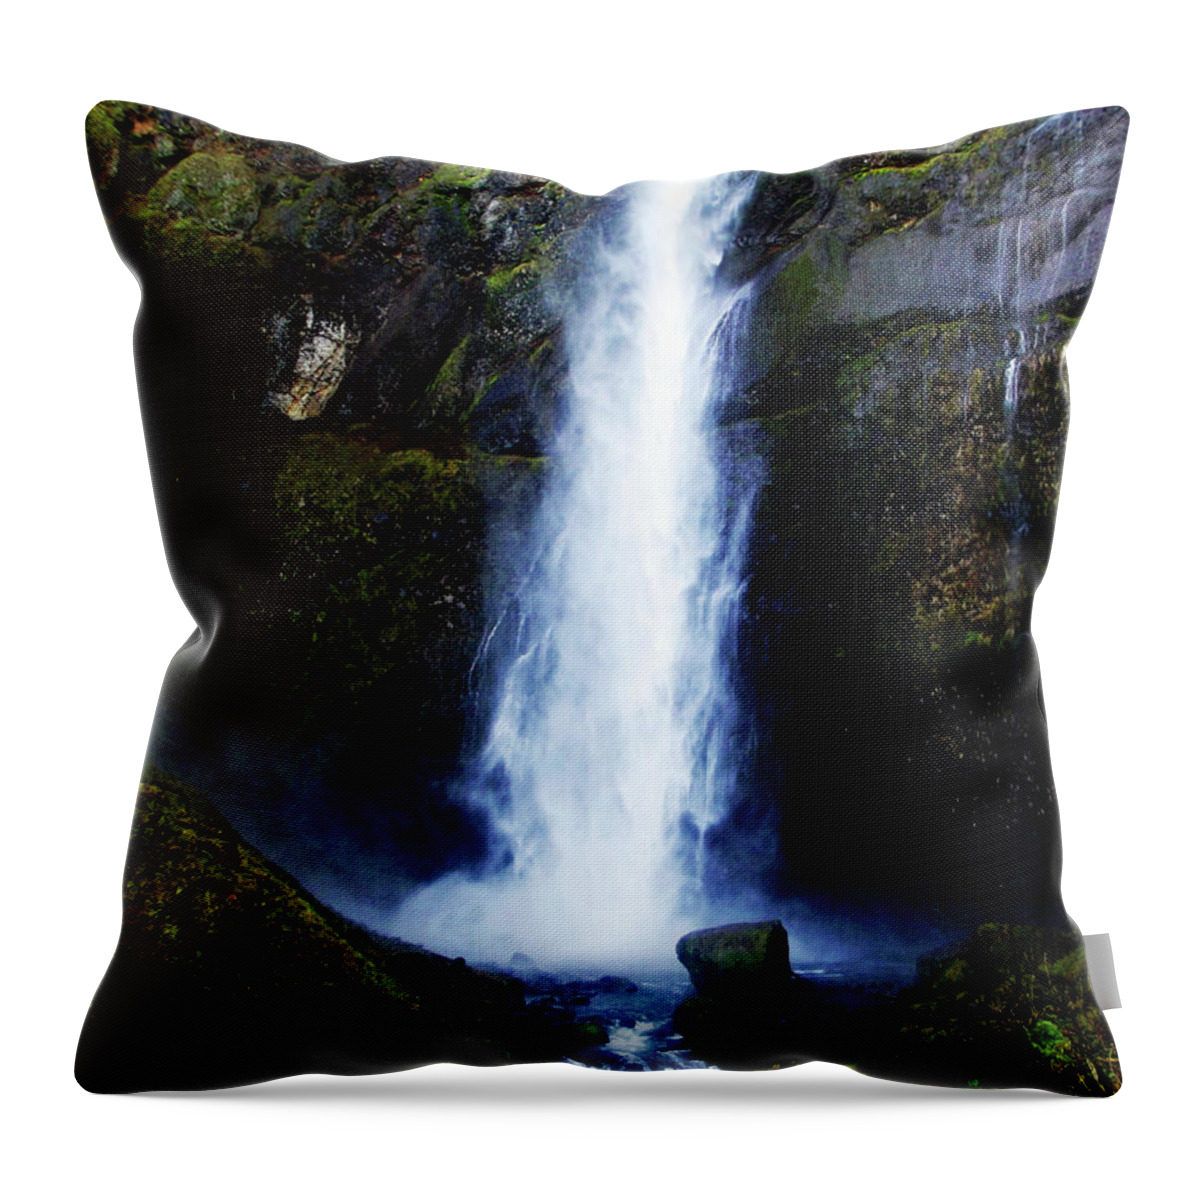 Waterfall Throw Pillow featuring the photograph Silver Falls Waterfall 1 by Melinda Firestone-White